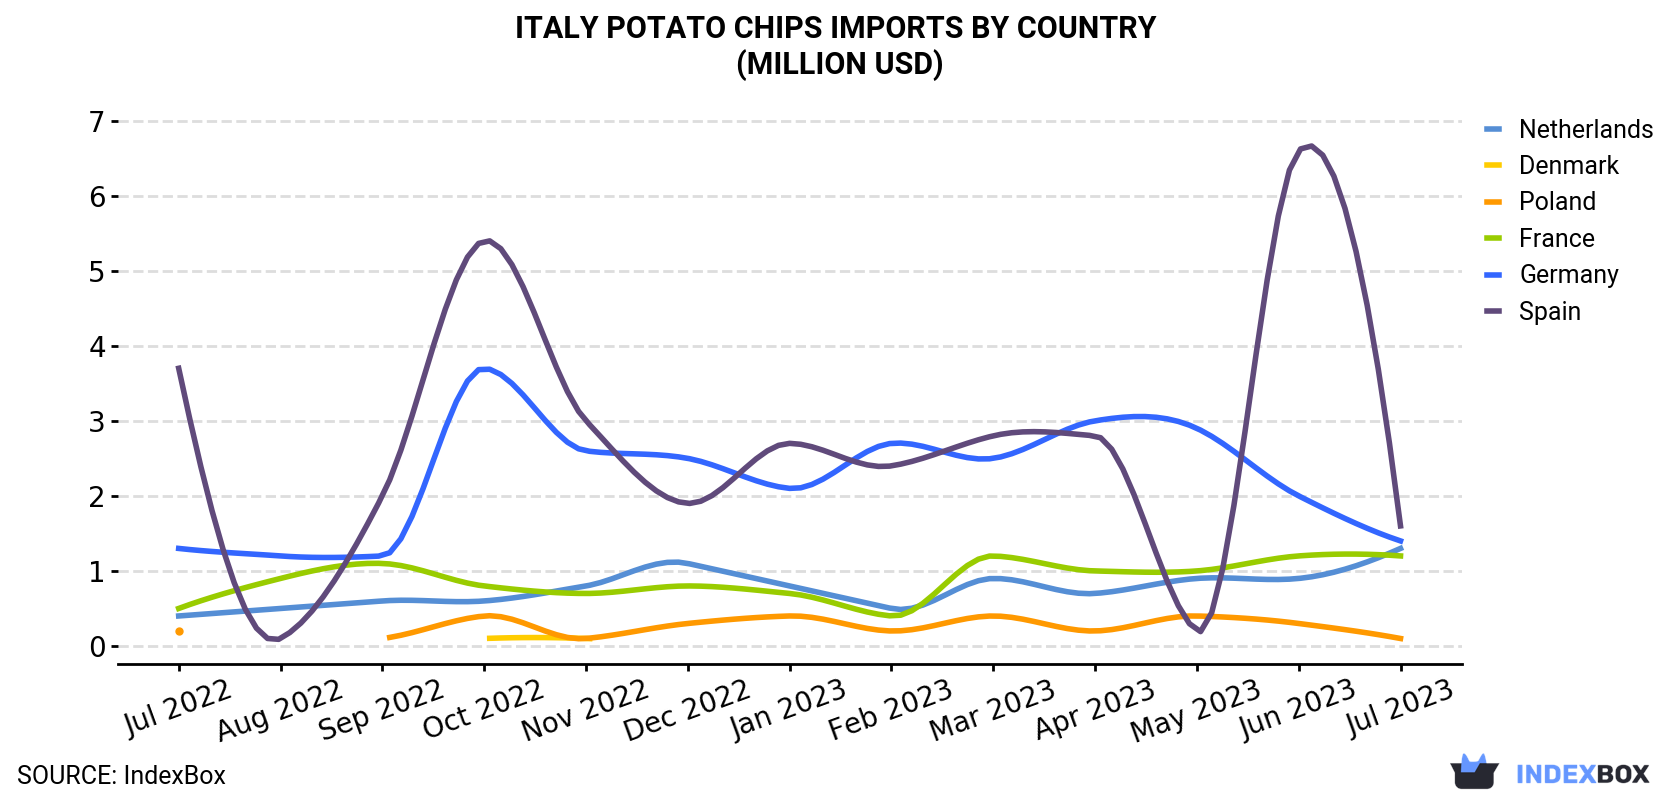 Italy Potato Chips Imports By Country (Million USD)